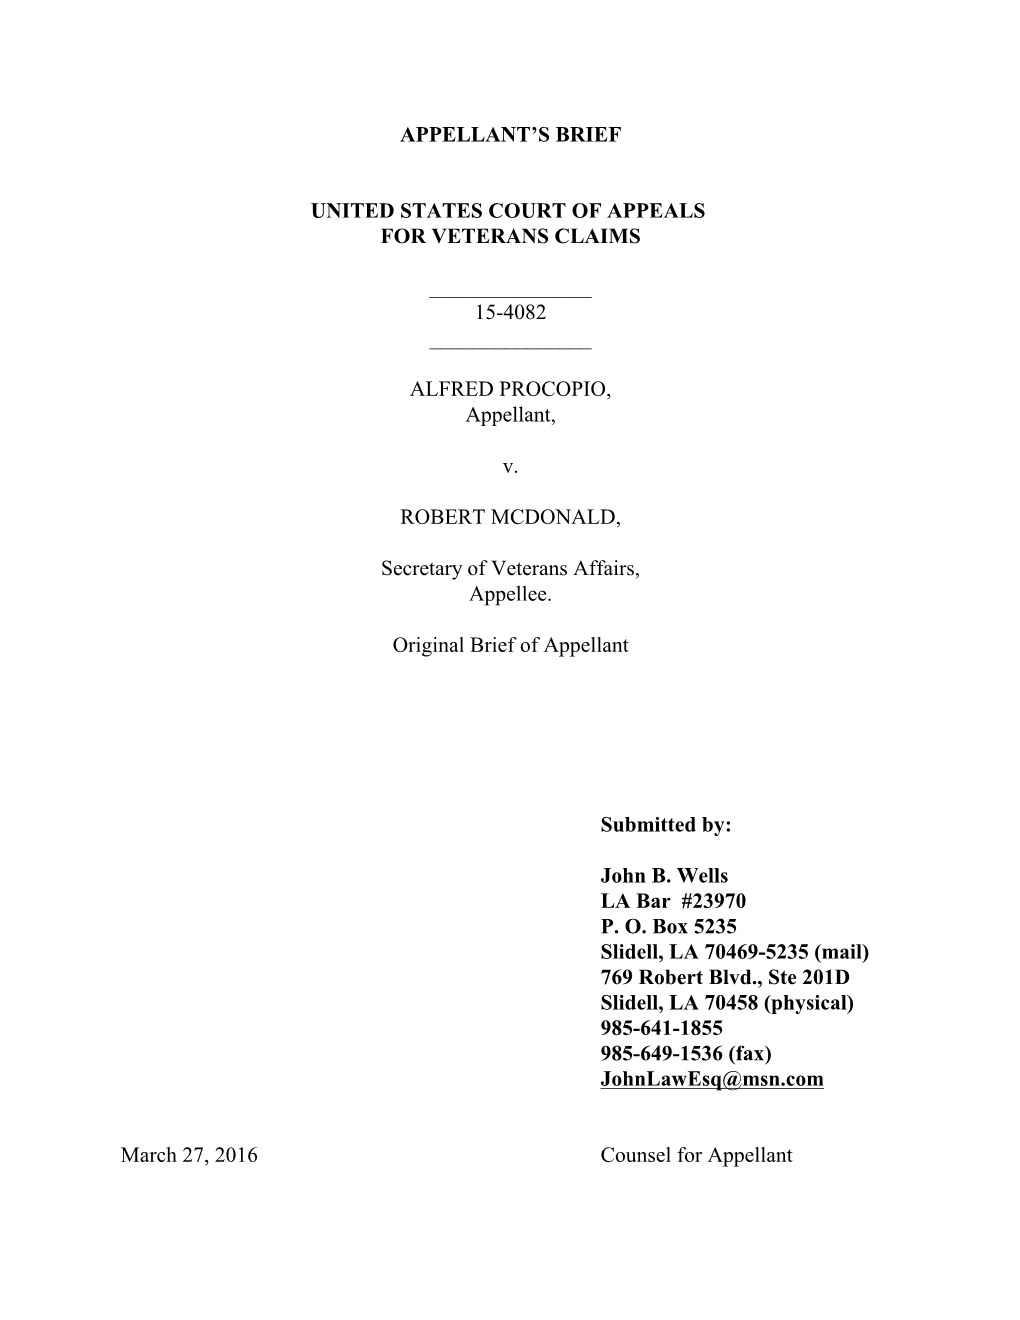 Appellant's Brief United States Court of Appeals